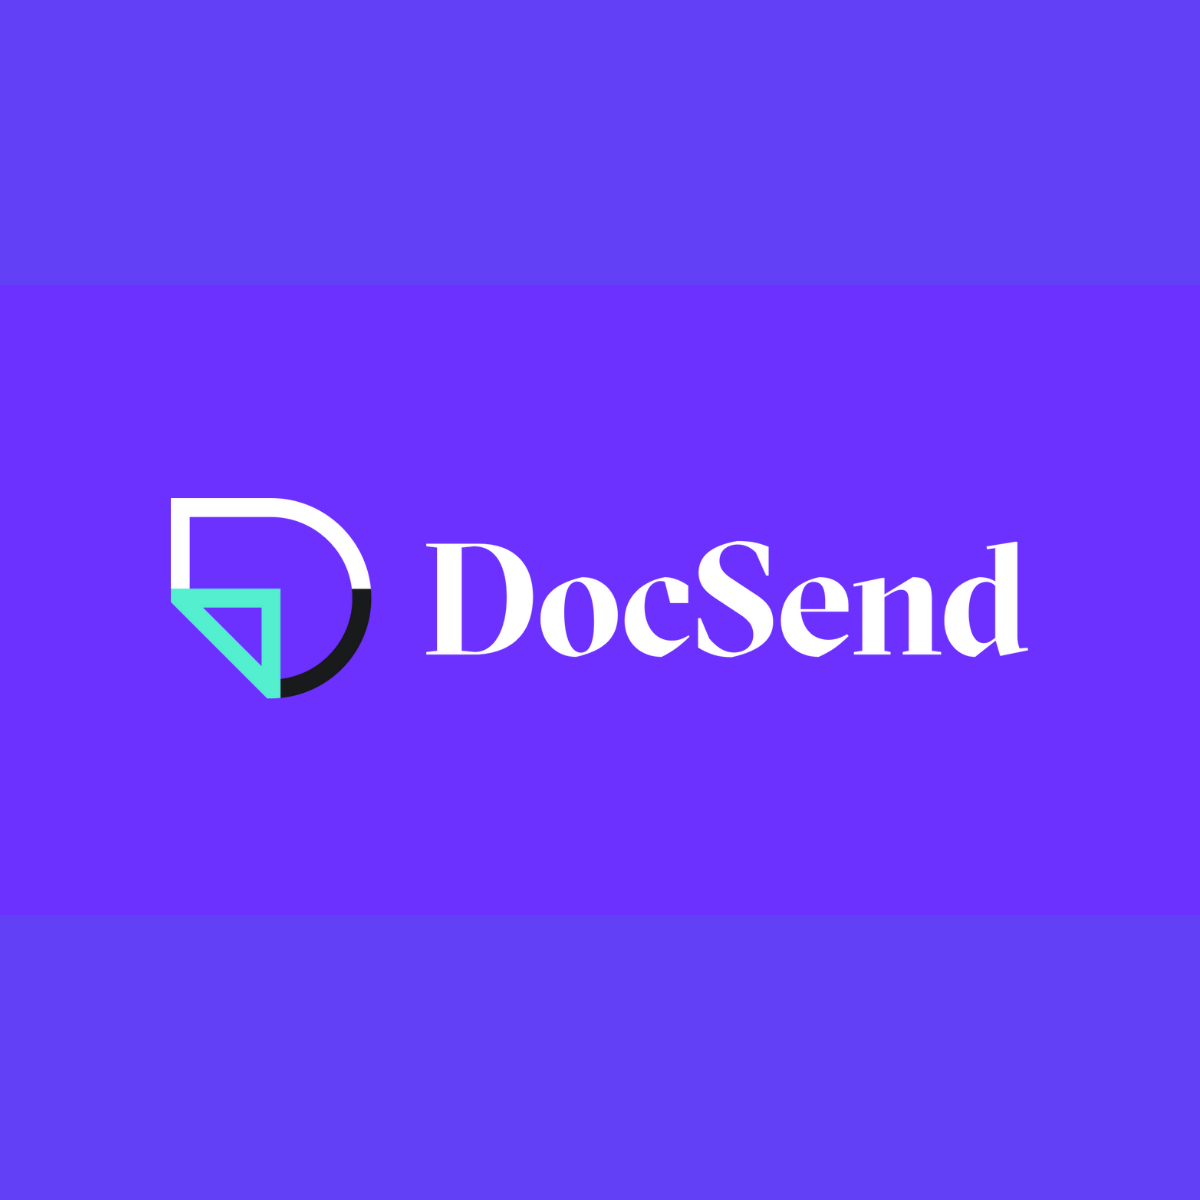 docsend document sharing platform: easy, simple, without papers!